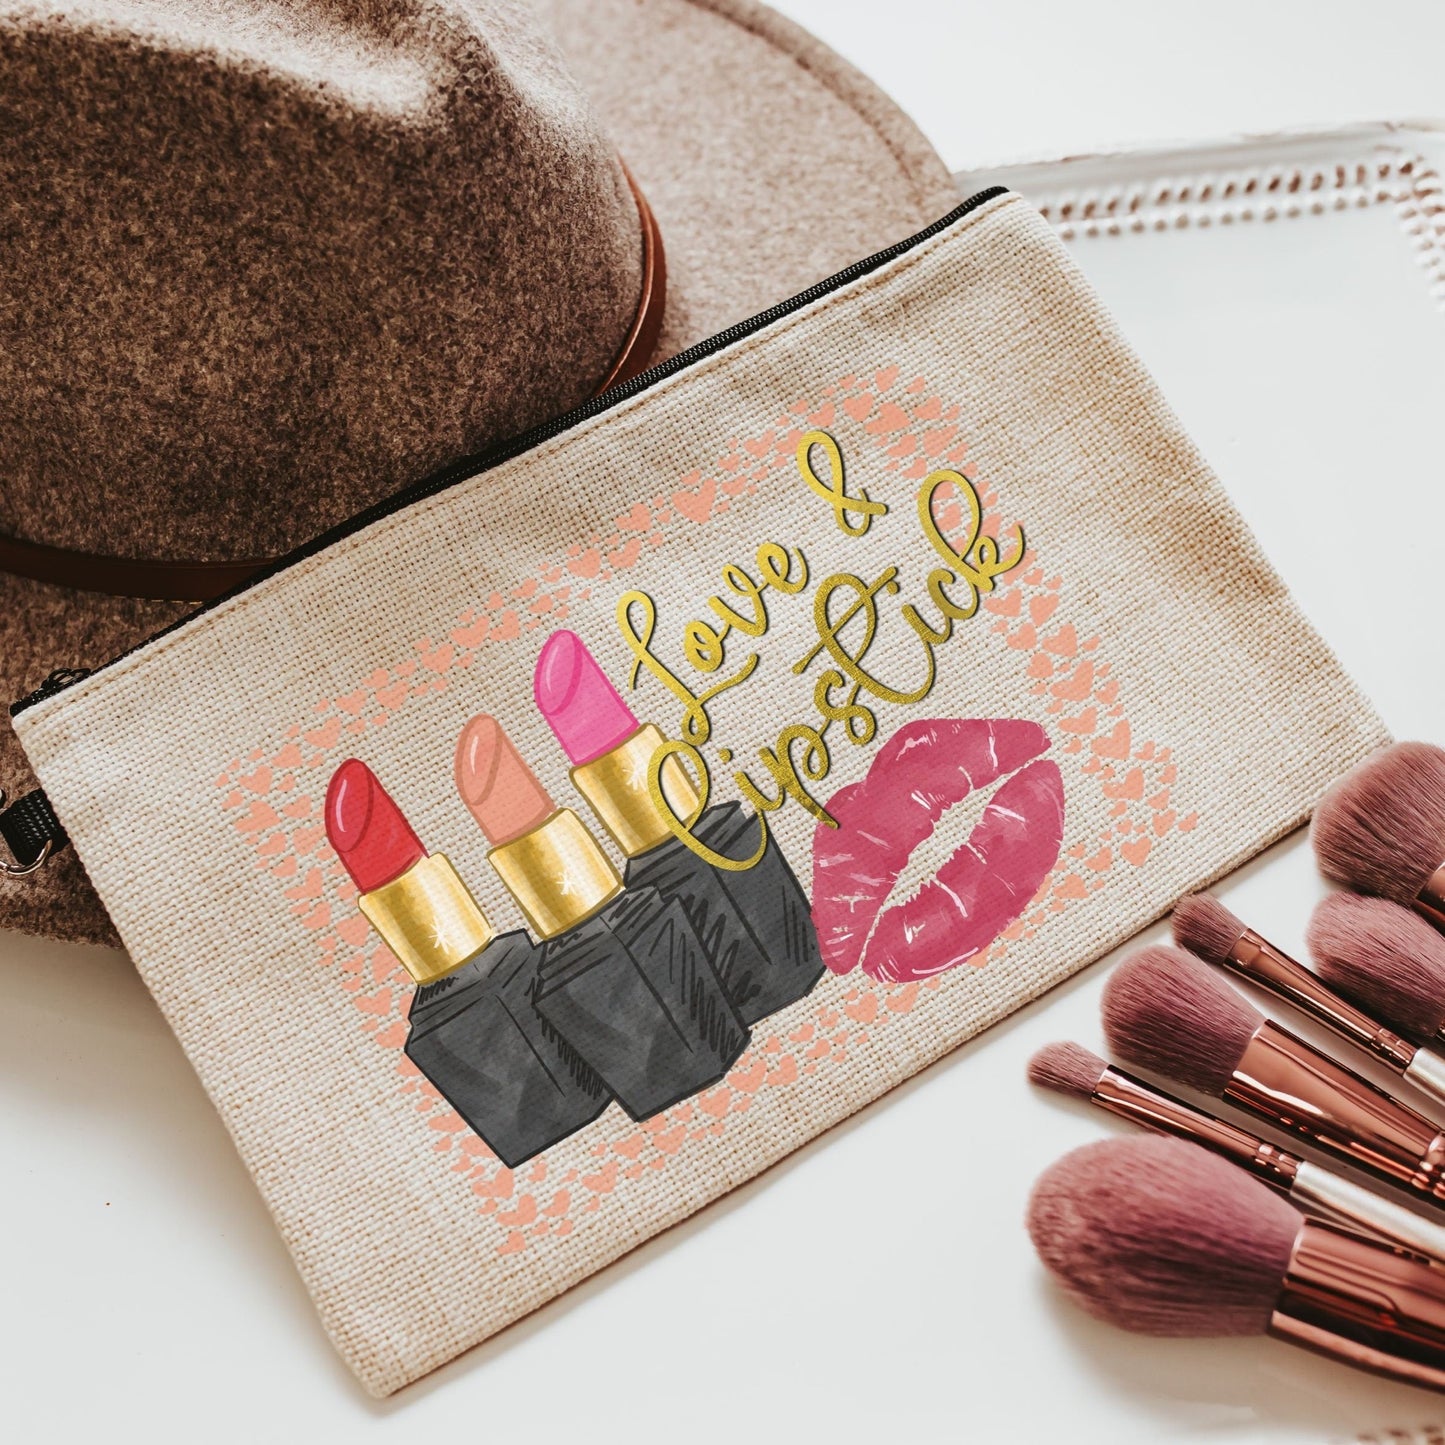 Birthday Gift for Friends - Love and Lipstick Makeup Bag